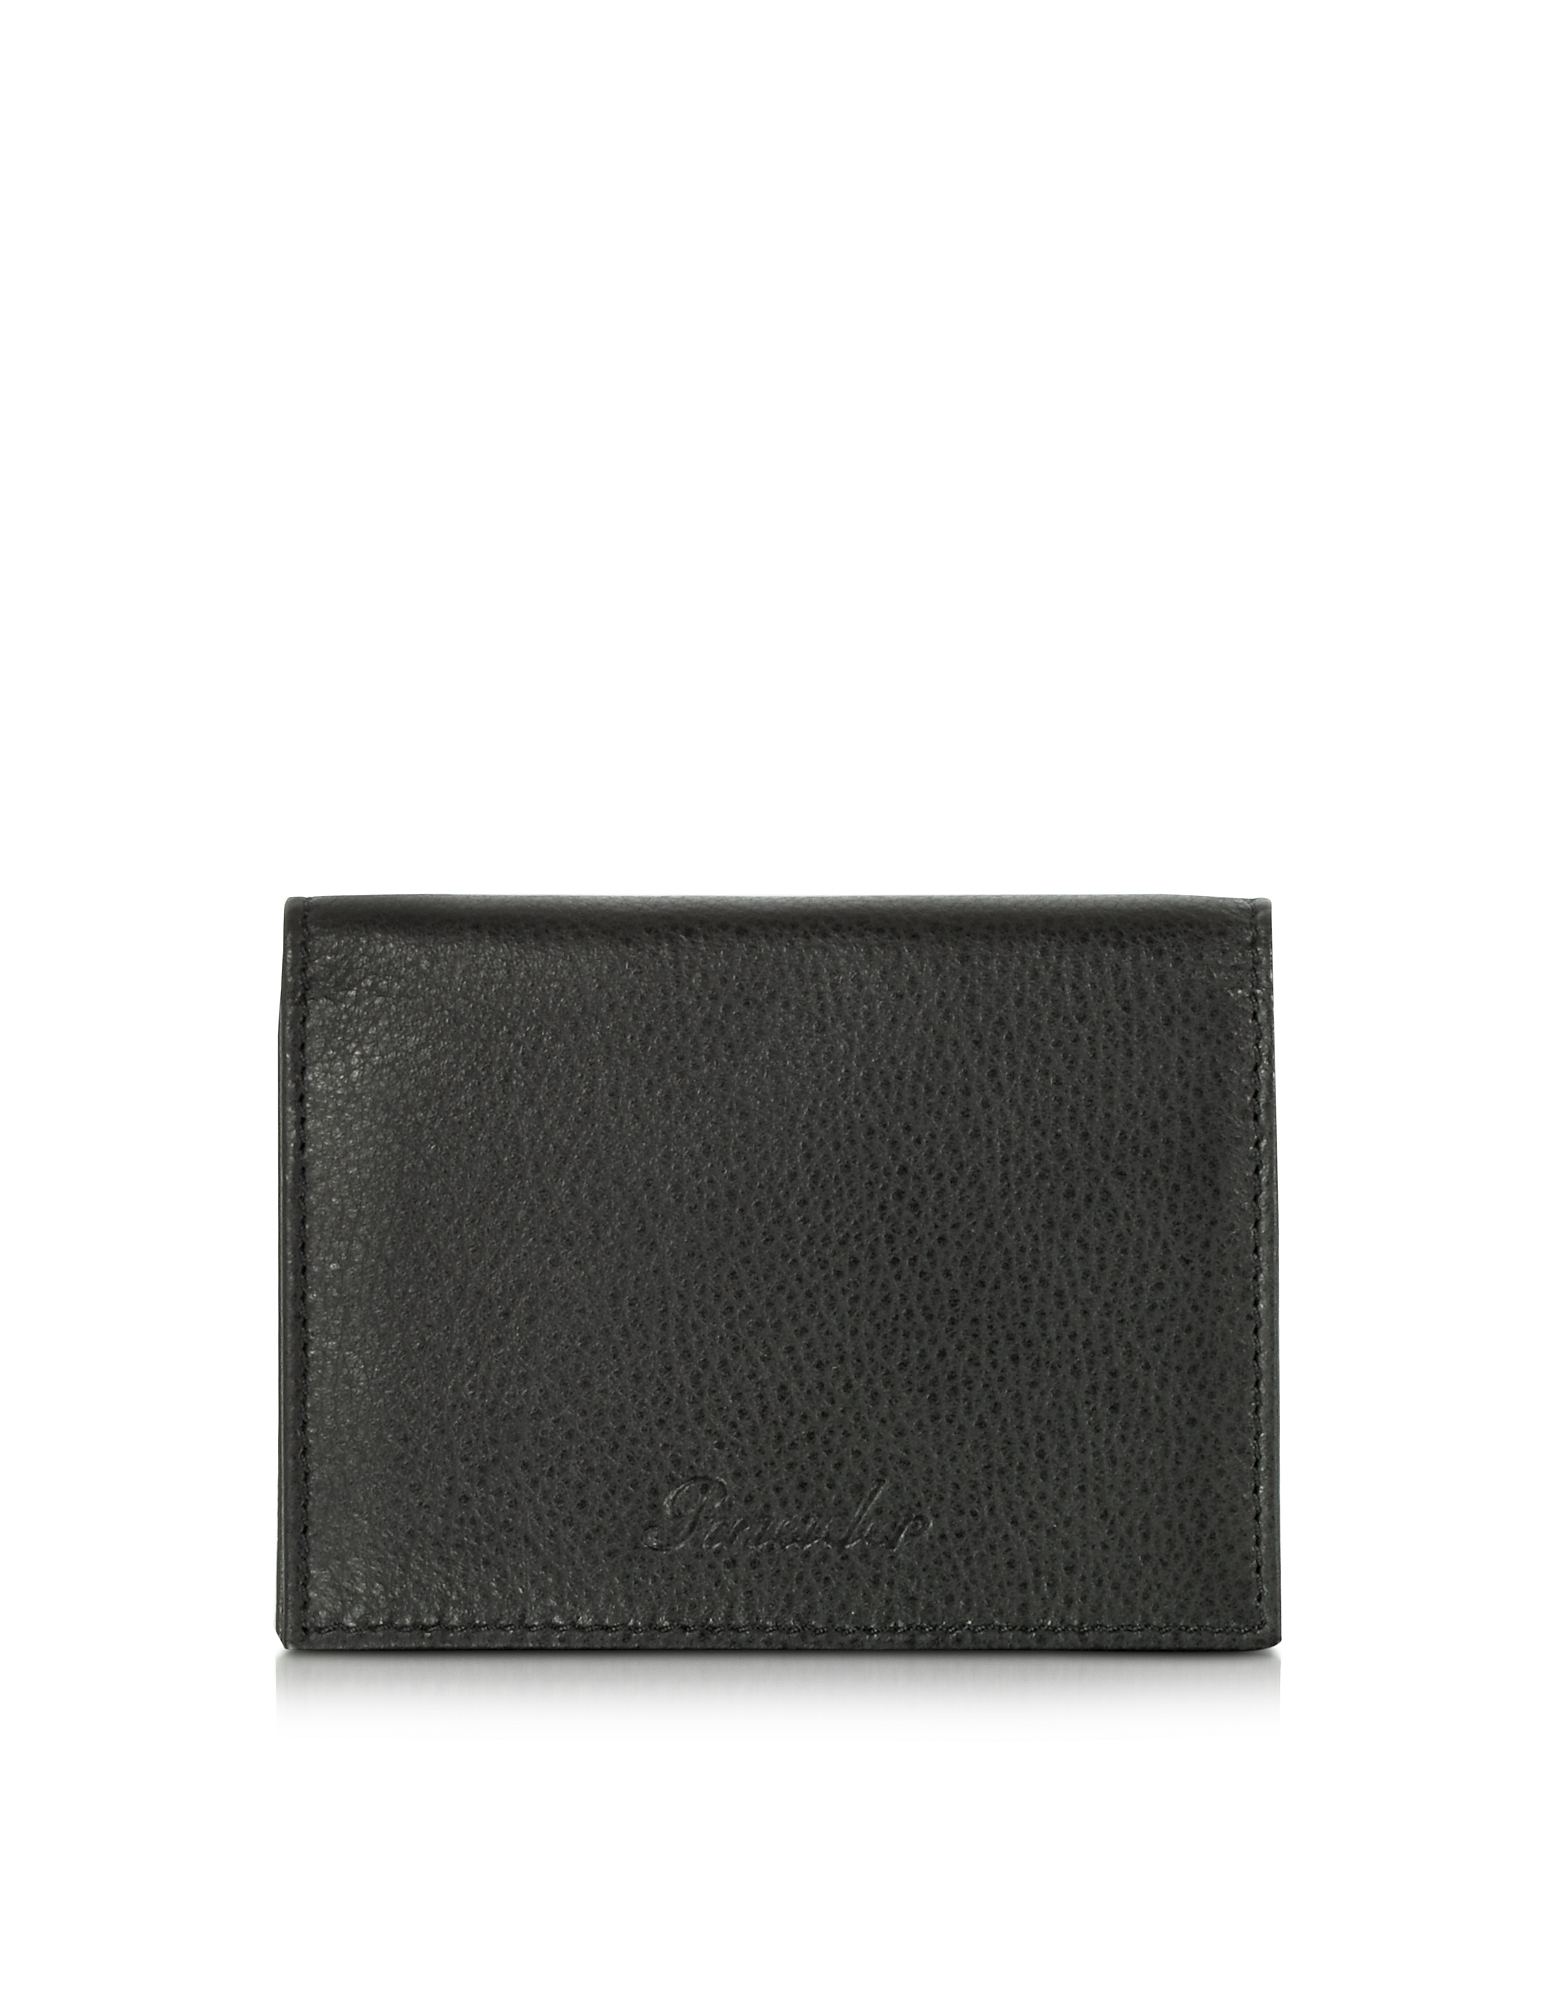 Pineider Country Black Leather Business Card Holder